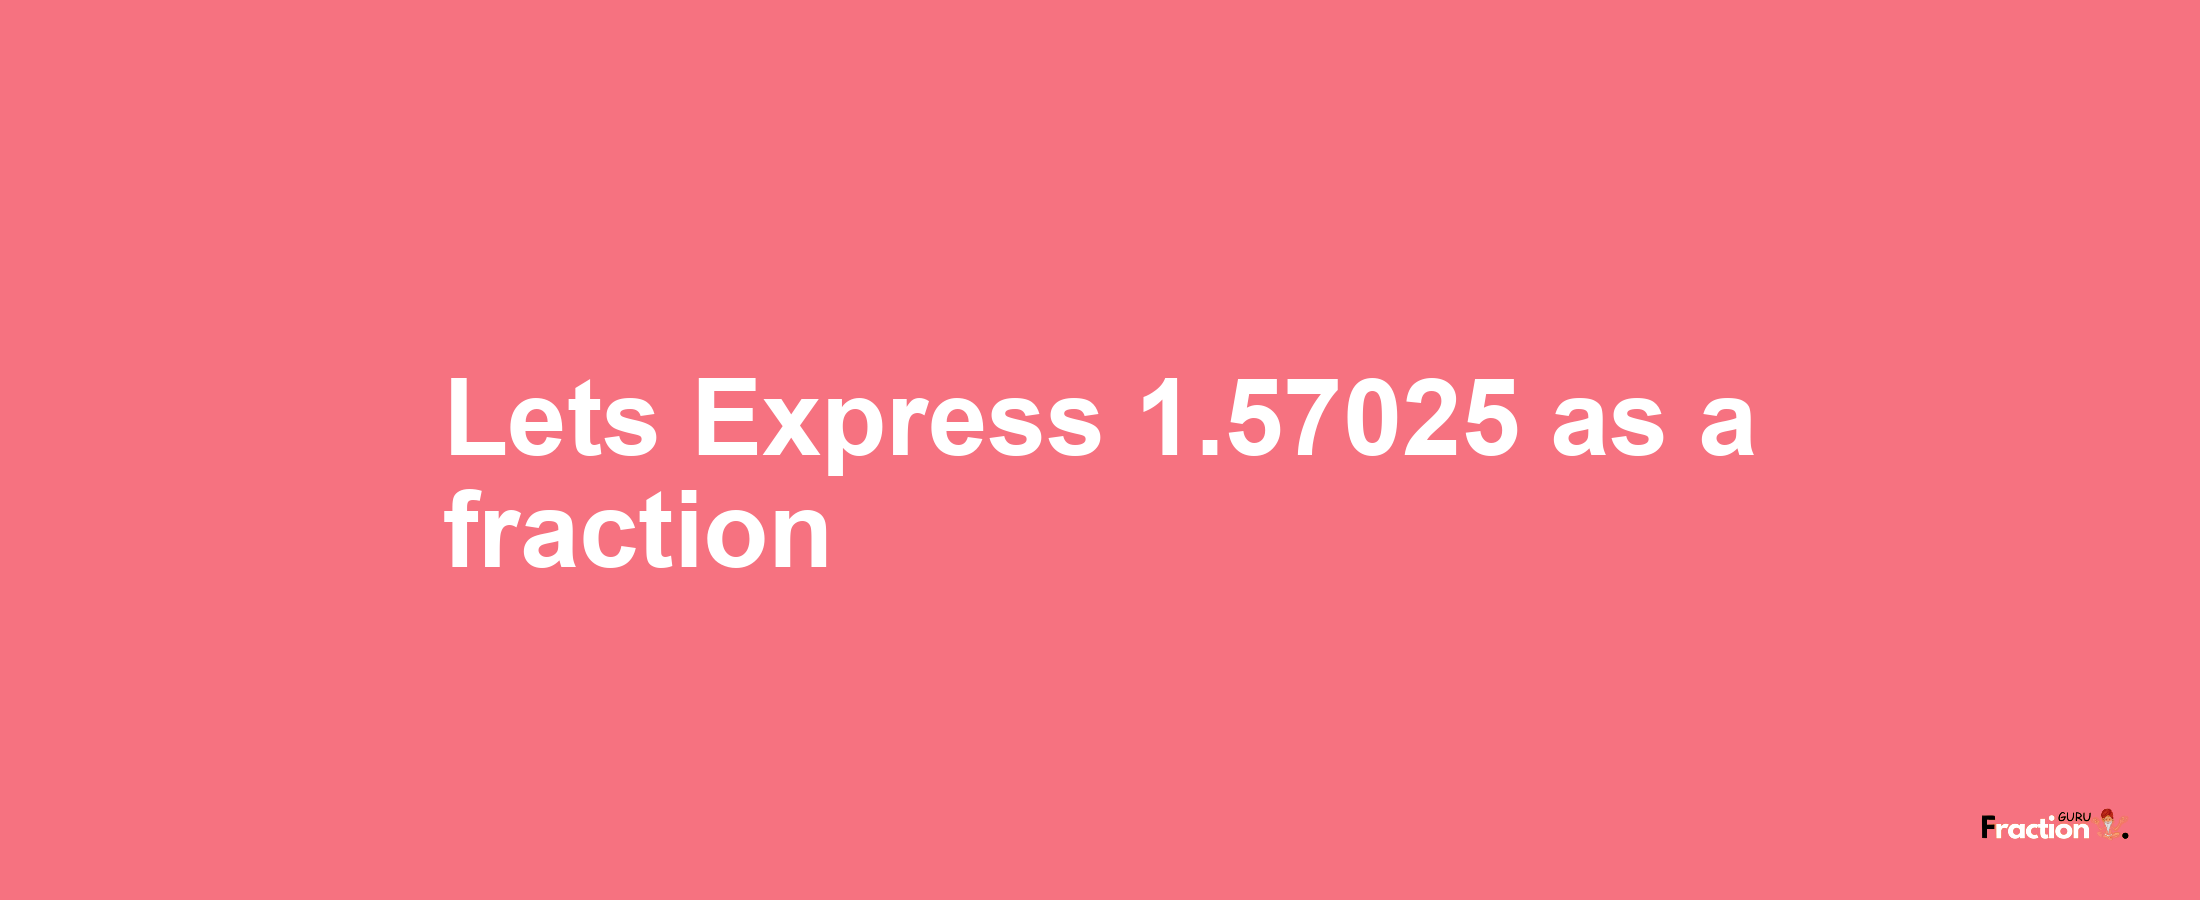 Lets Express 1.57025 as afraction